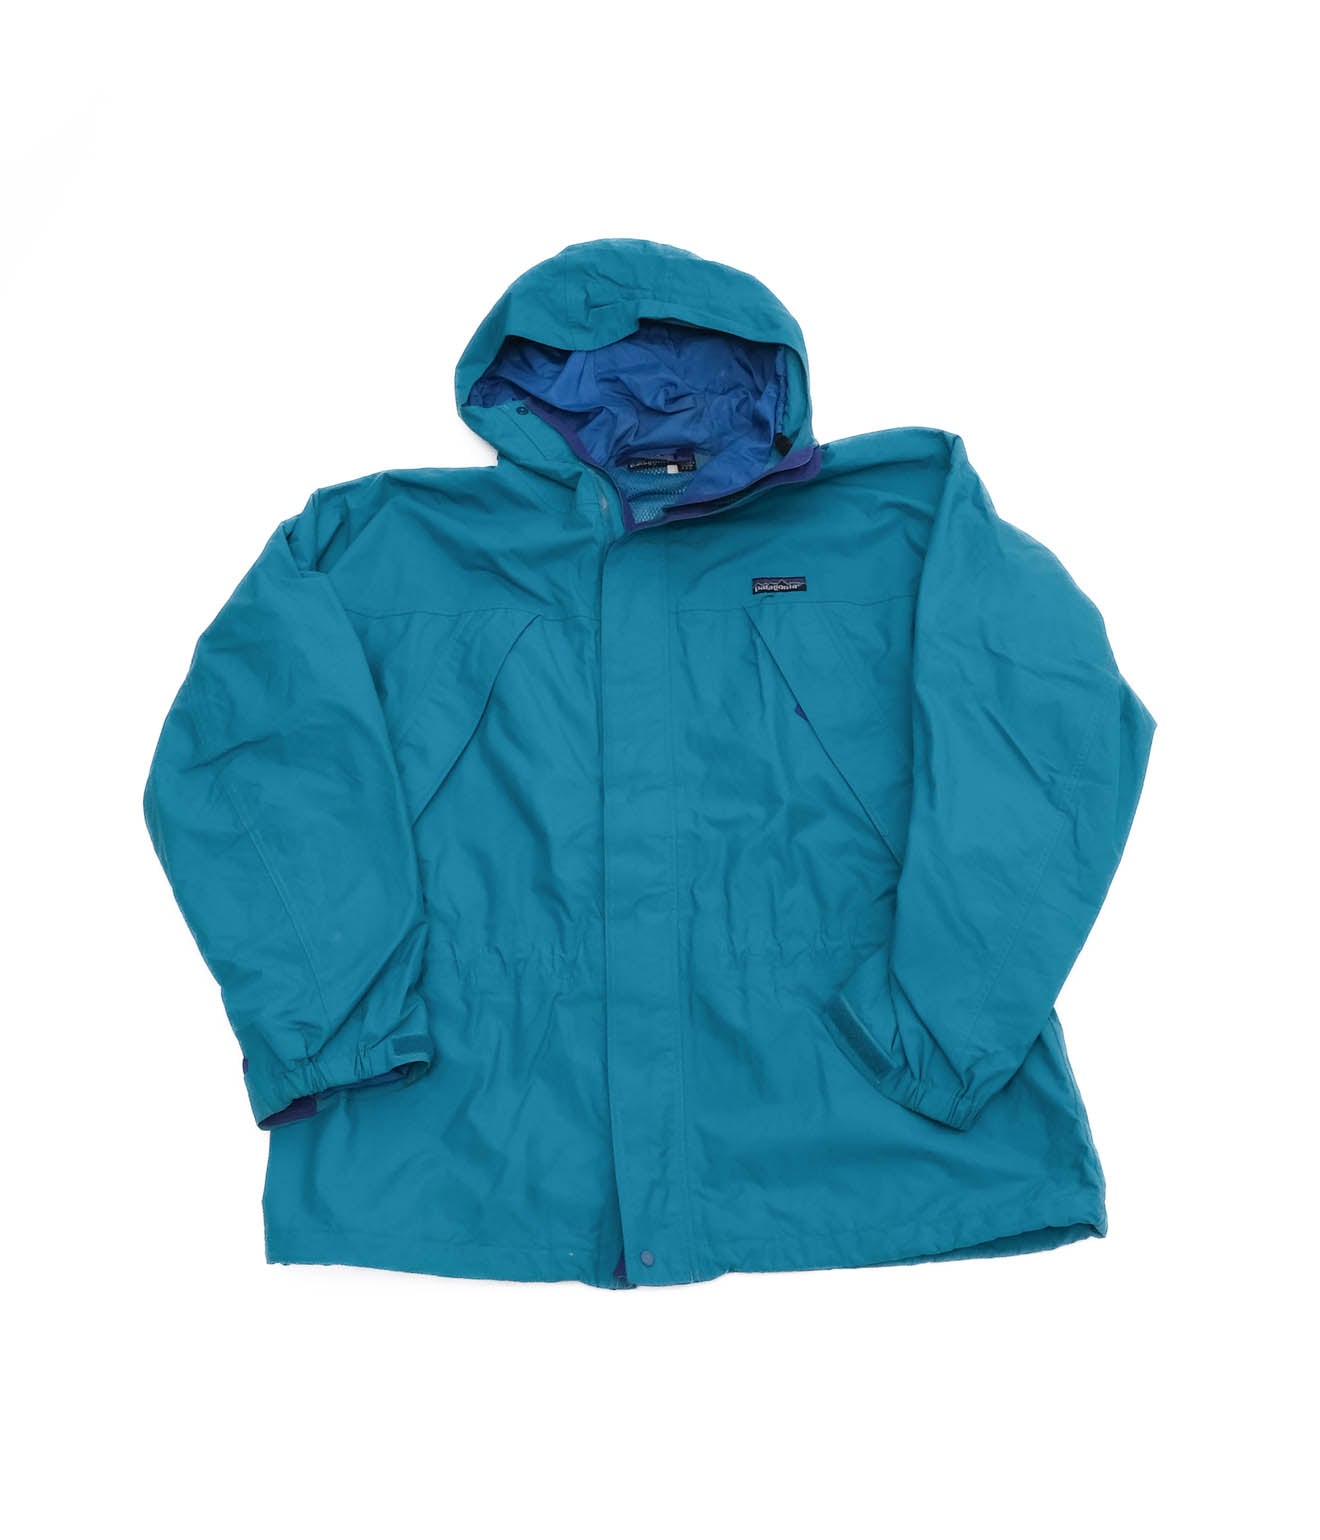 90's Patagonia Guide Shell Jacket (Emerald green)